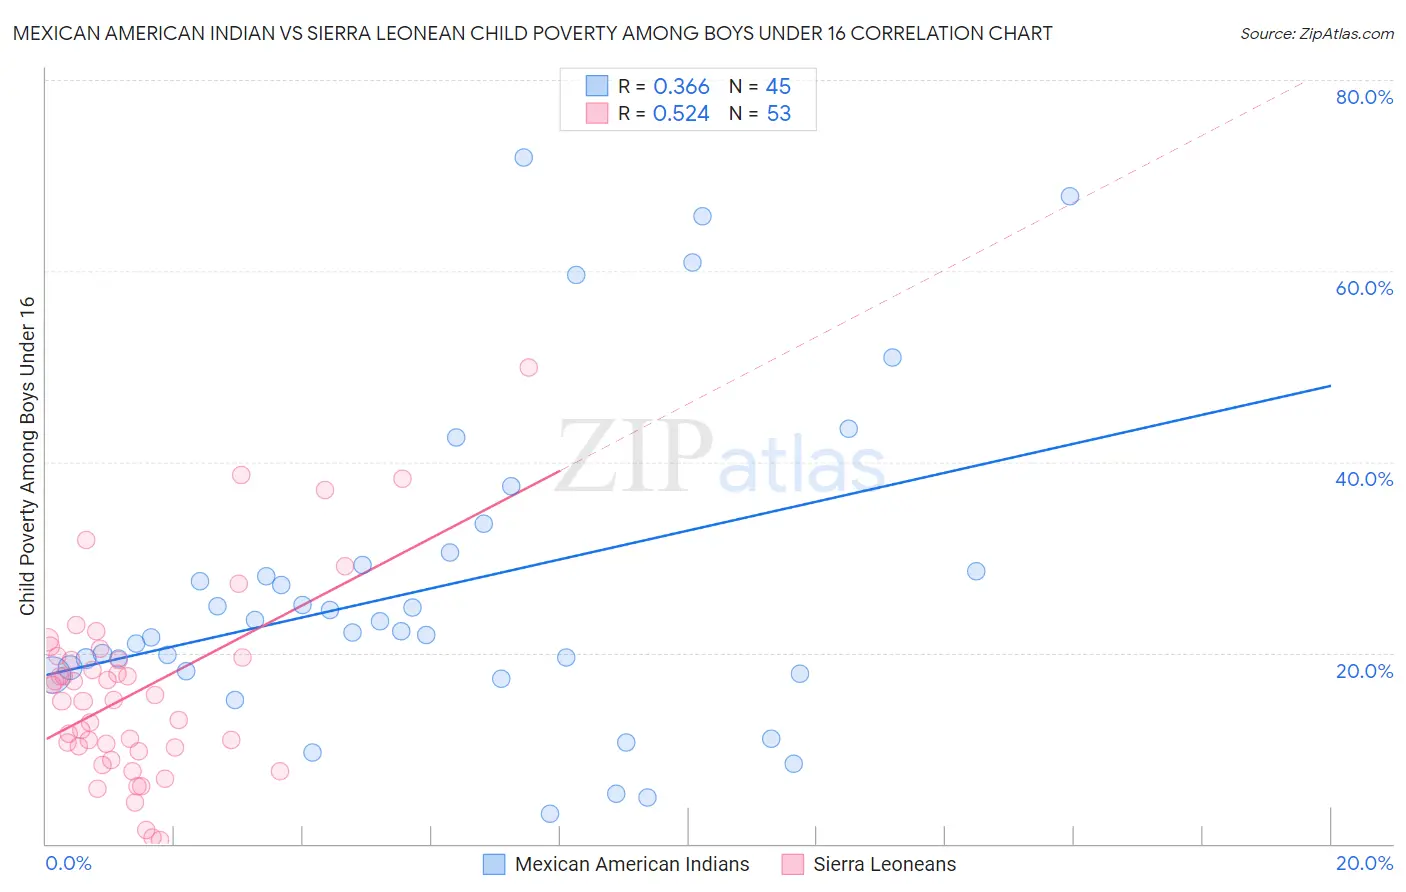 Mexican American Indian vs Sierra Leonean Child Poverty Among Boys Under 16